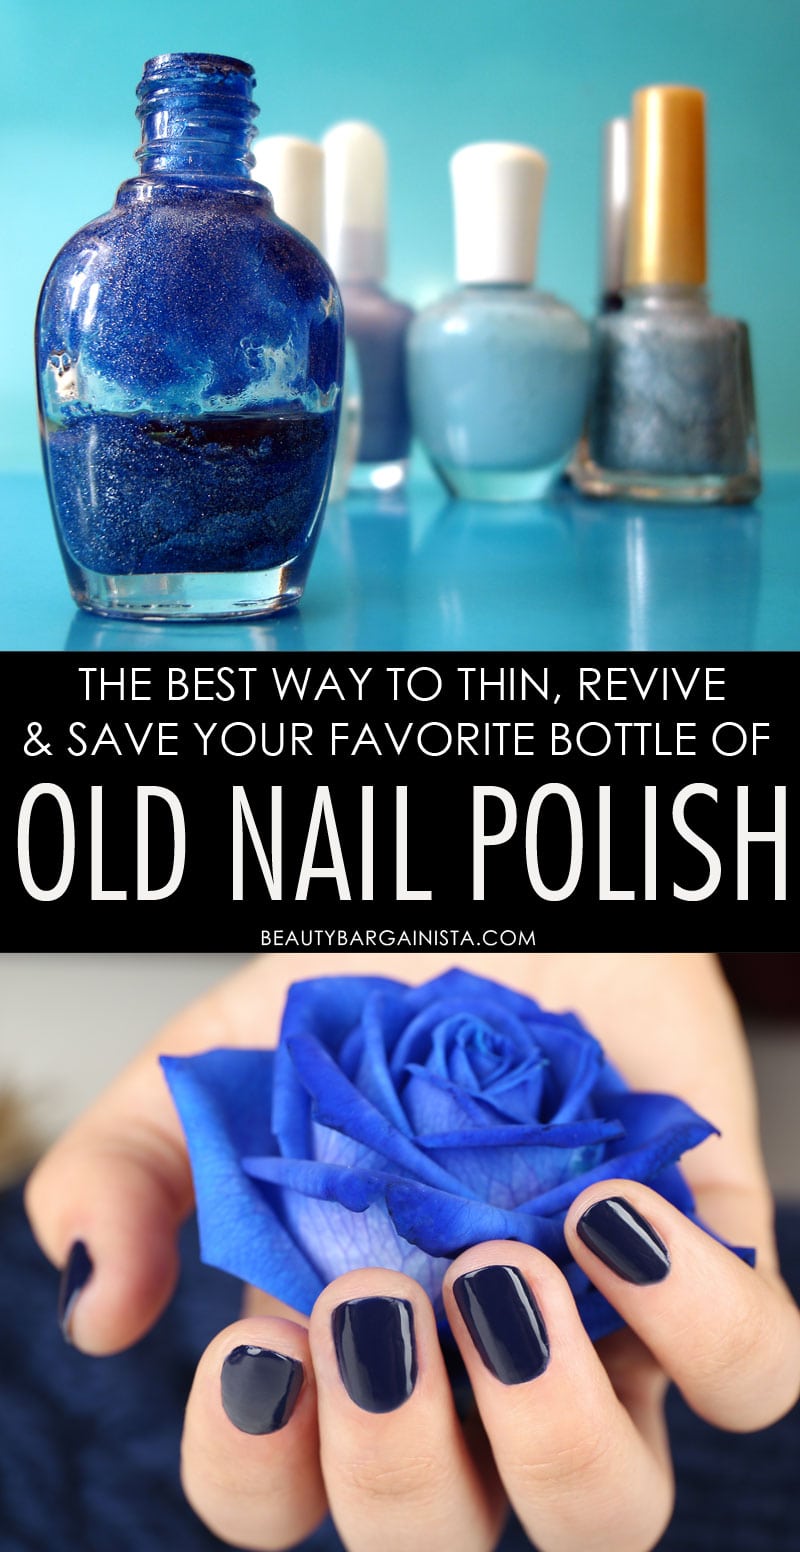 Do you want to thin out your favorite nail polish color that has gotten too thick and clumpy? Anyone who loves nail lacquer like I do has a few bottles of old, gloopy nail polish that is just too pretty to toss in the trash. I've researched the best ways to extend the life of your nail polish using the best nail polish thinners to help you restore your favorite nail polishes like a pro manicurist.